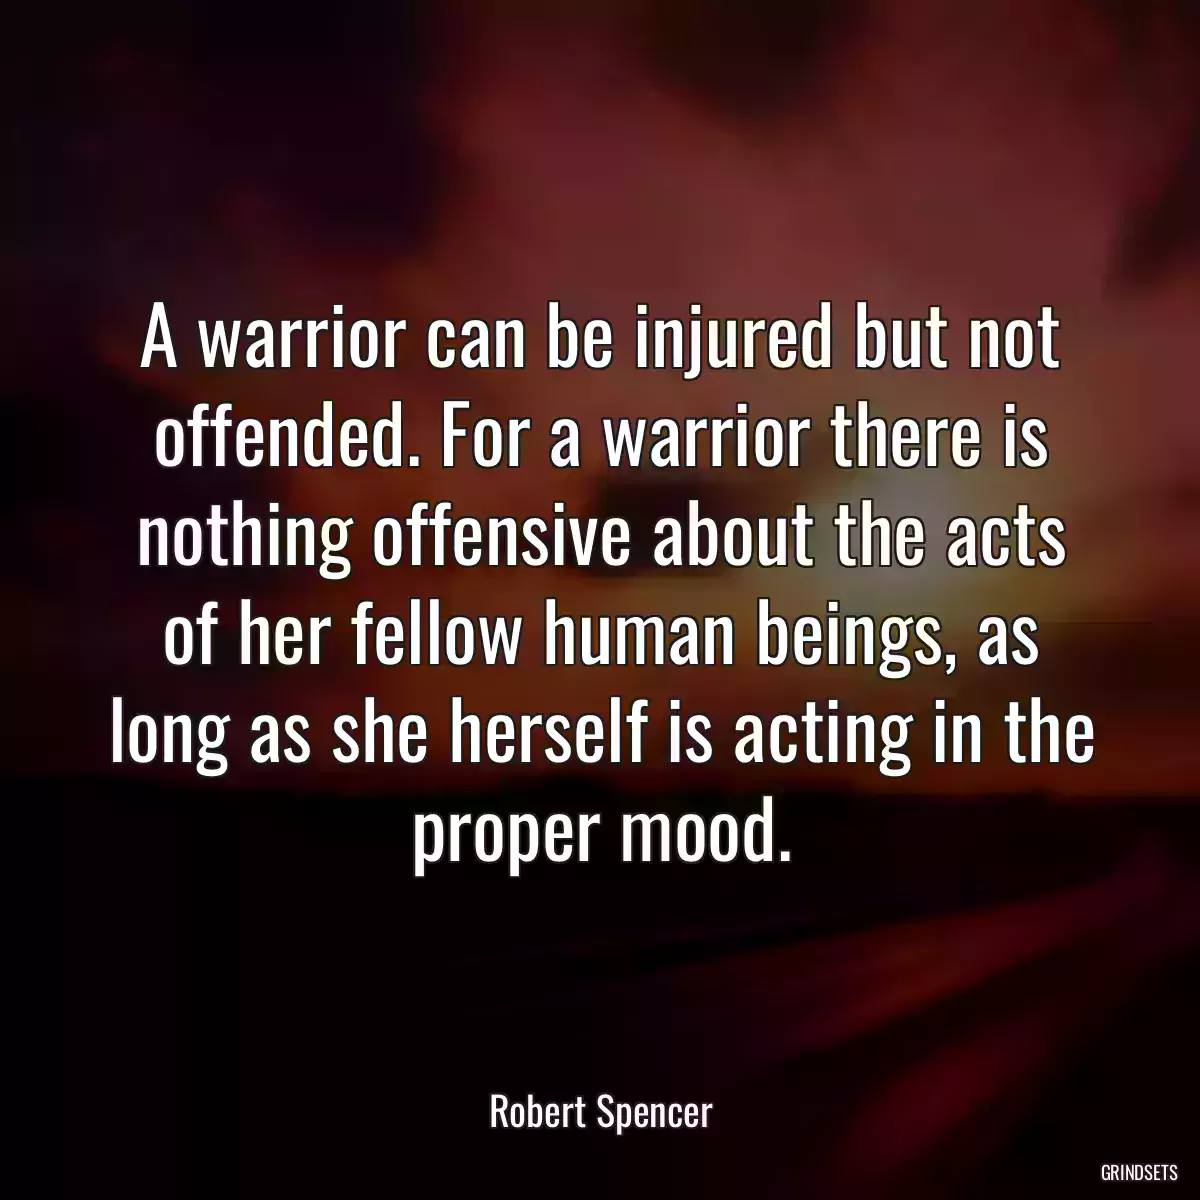 A warrior can be injured but not offended. For a warrior there is nothing offensive about the acts of her fellow human beings, as long as she herself is acting in the proper mood.